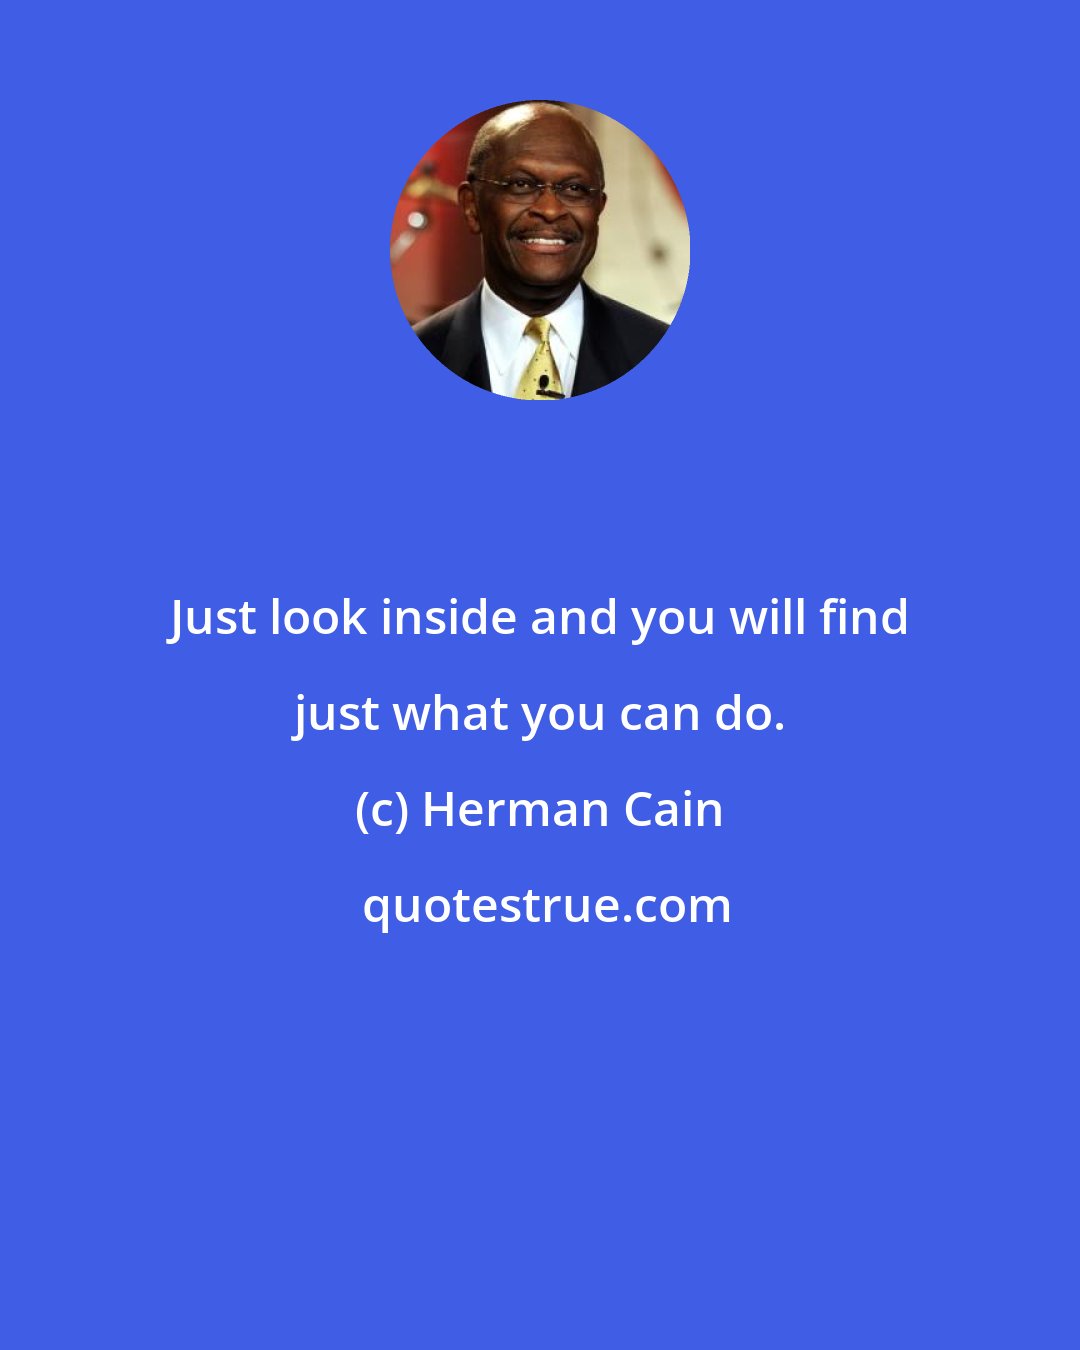 Herman Cain: Just look inside and you will find just what you can do.